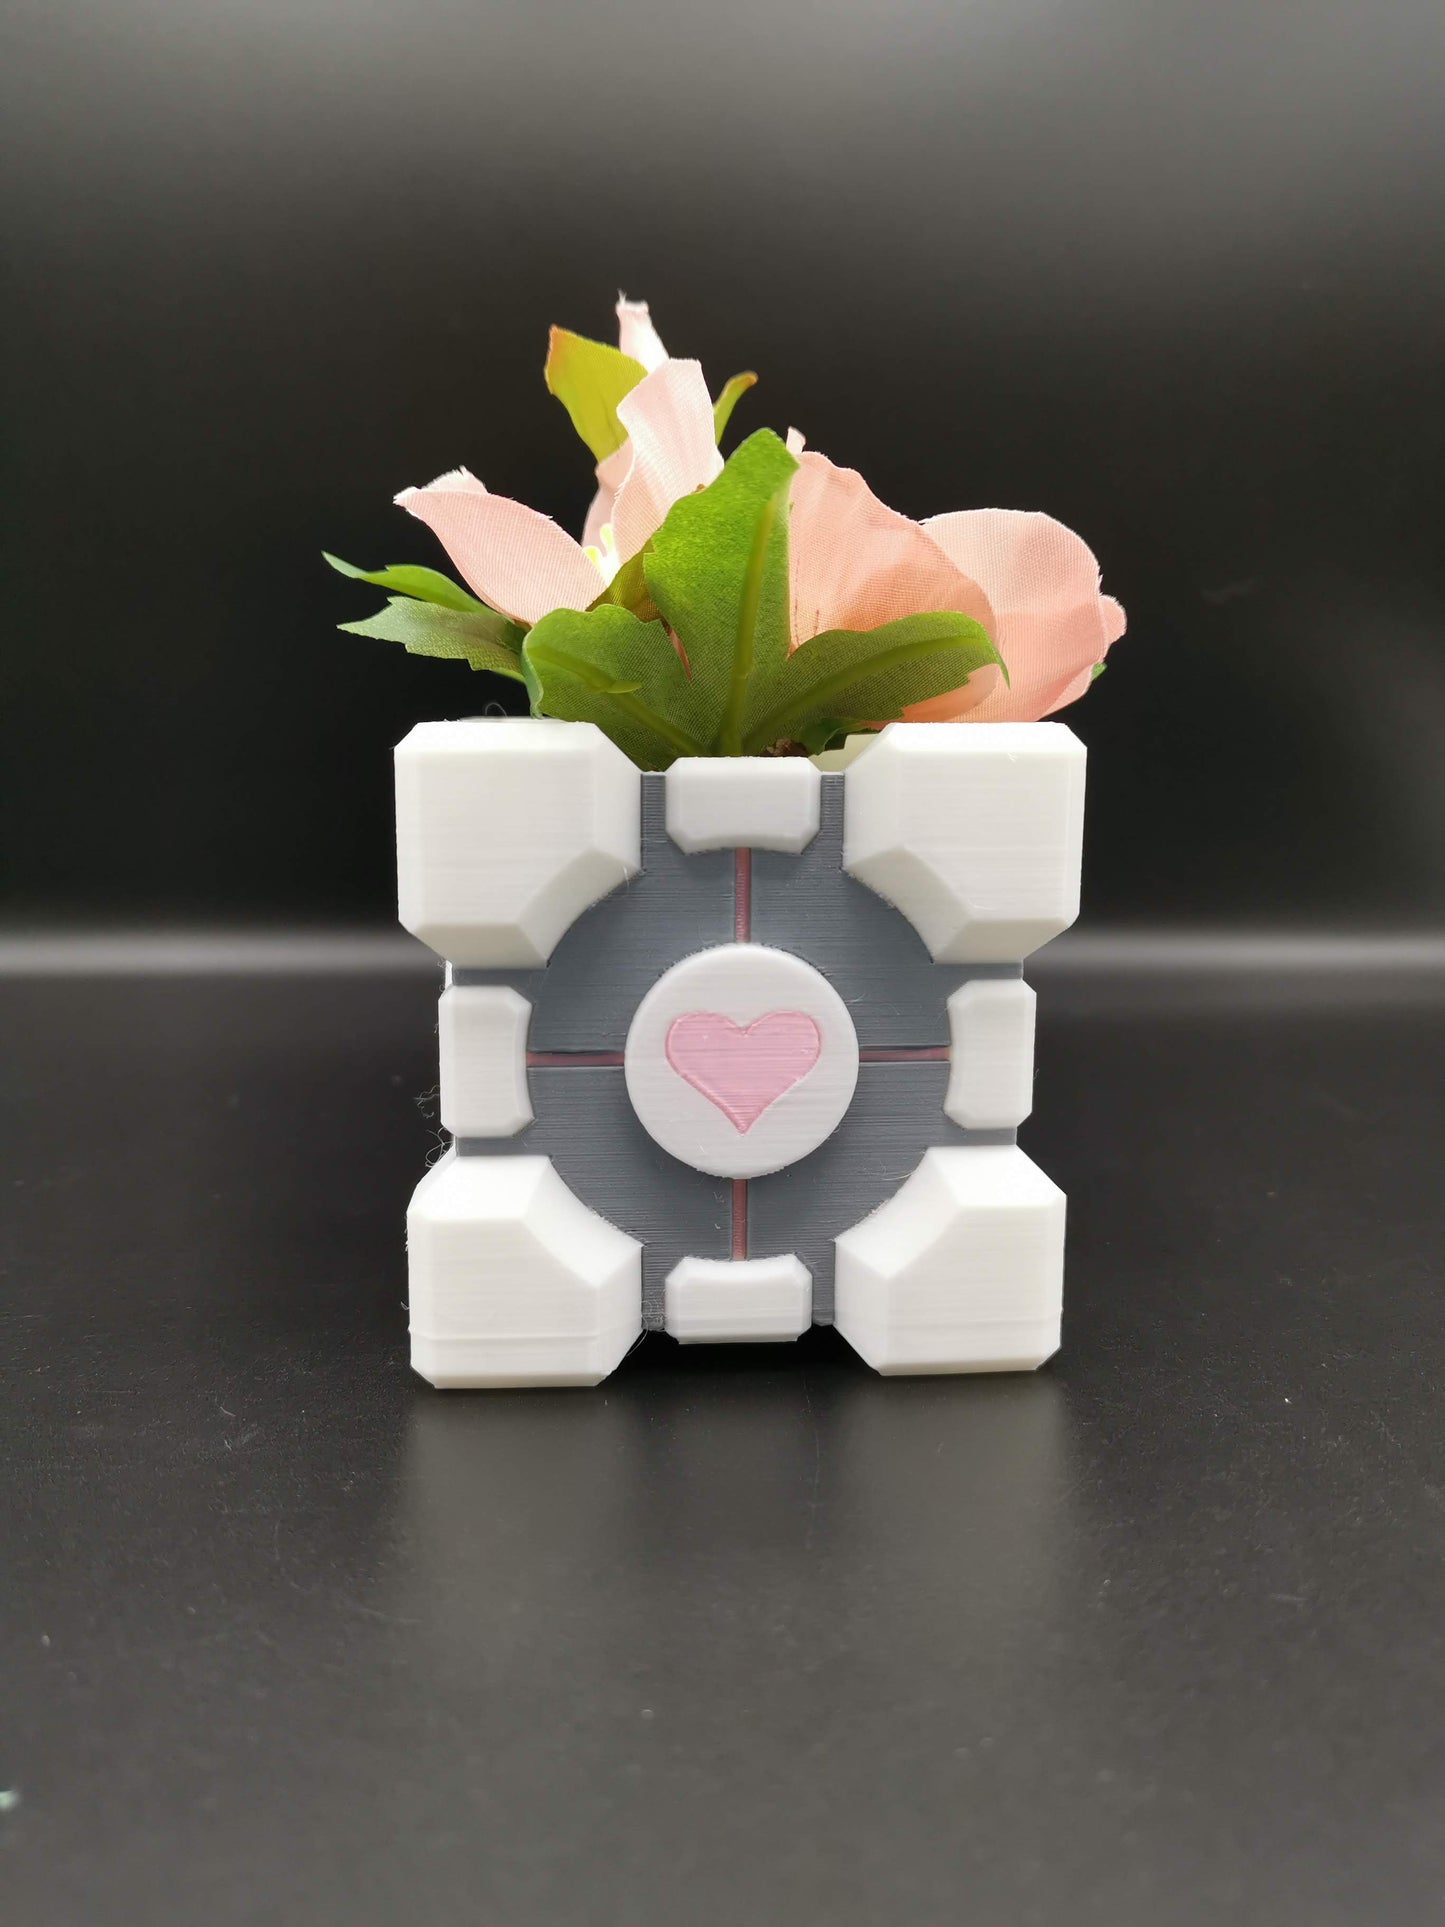 Companion Cube Portal planter close up from front with plant